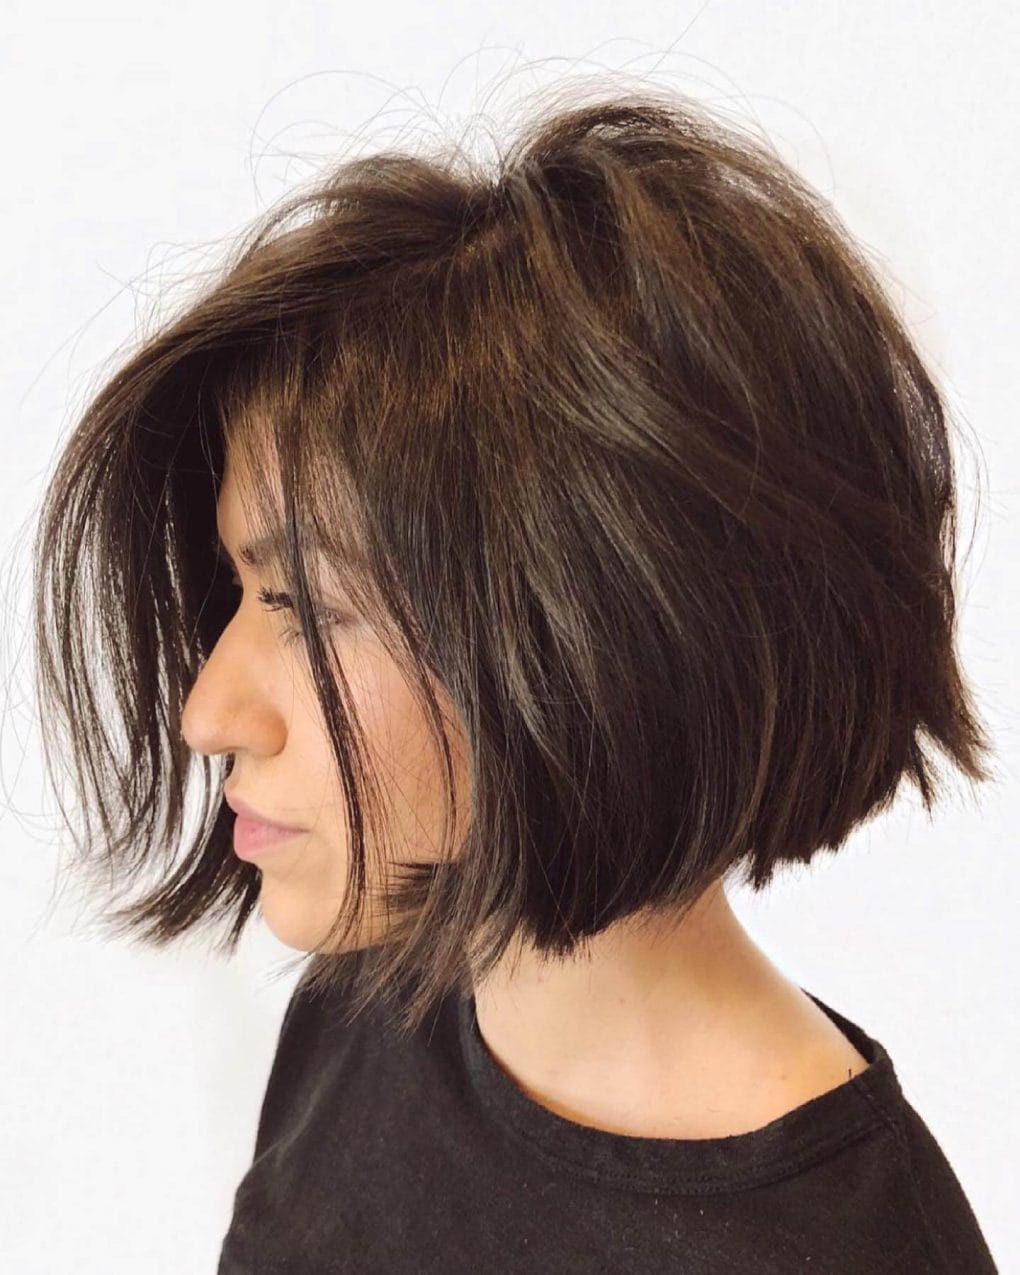 Asymmetric bob for thick hair with side fringe.